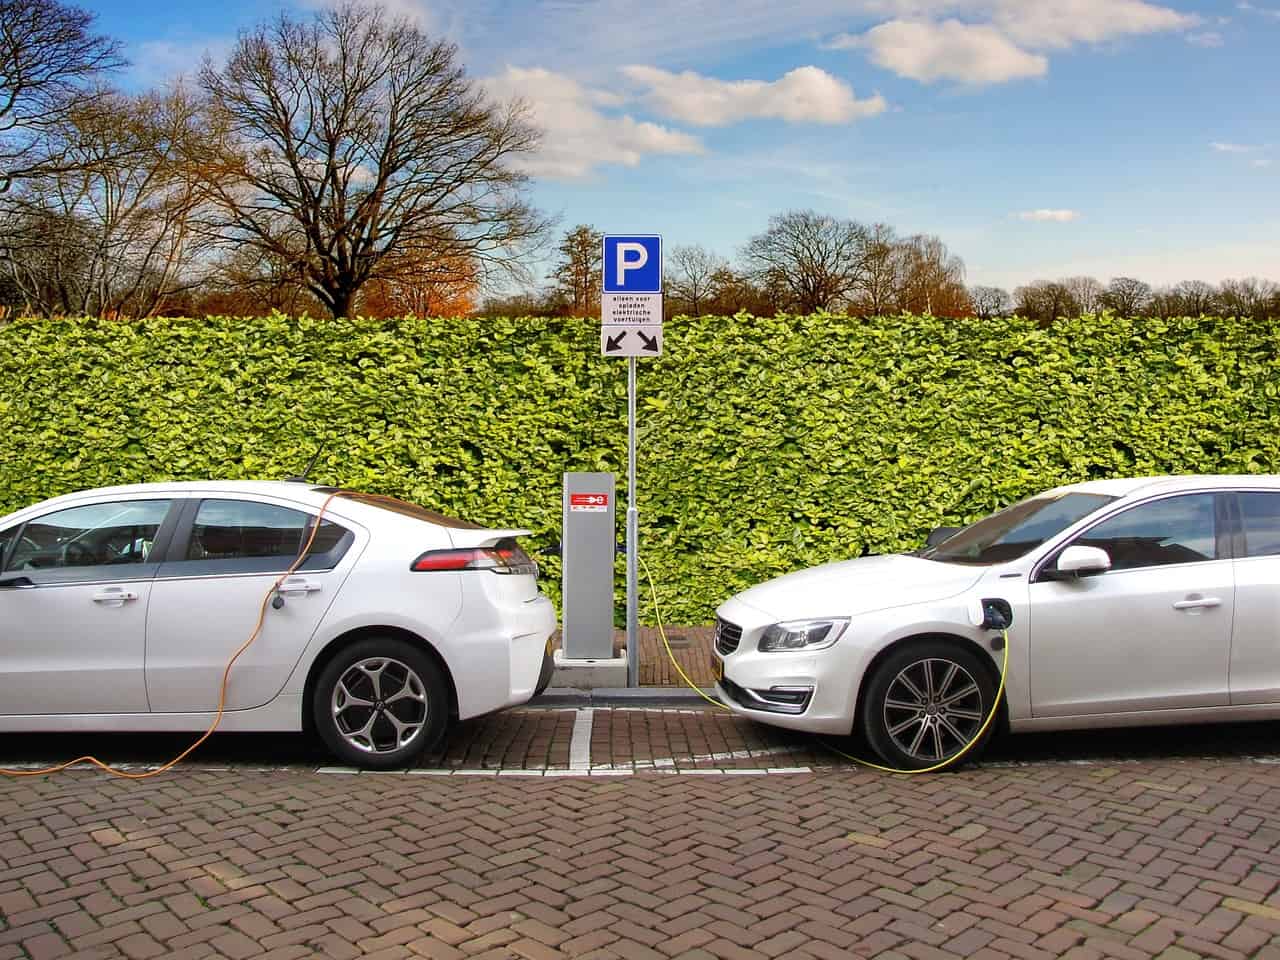 The truth about electric driving: Auke Hoekstra debunks 3 persistent myths